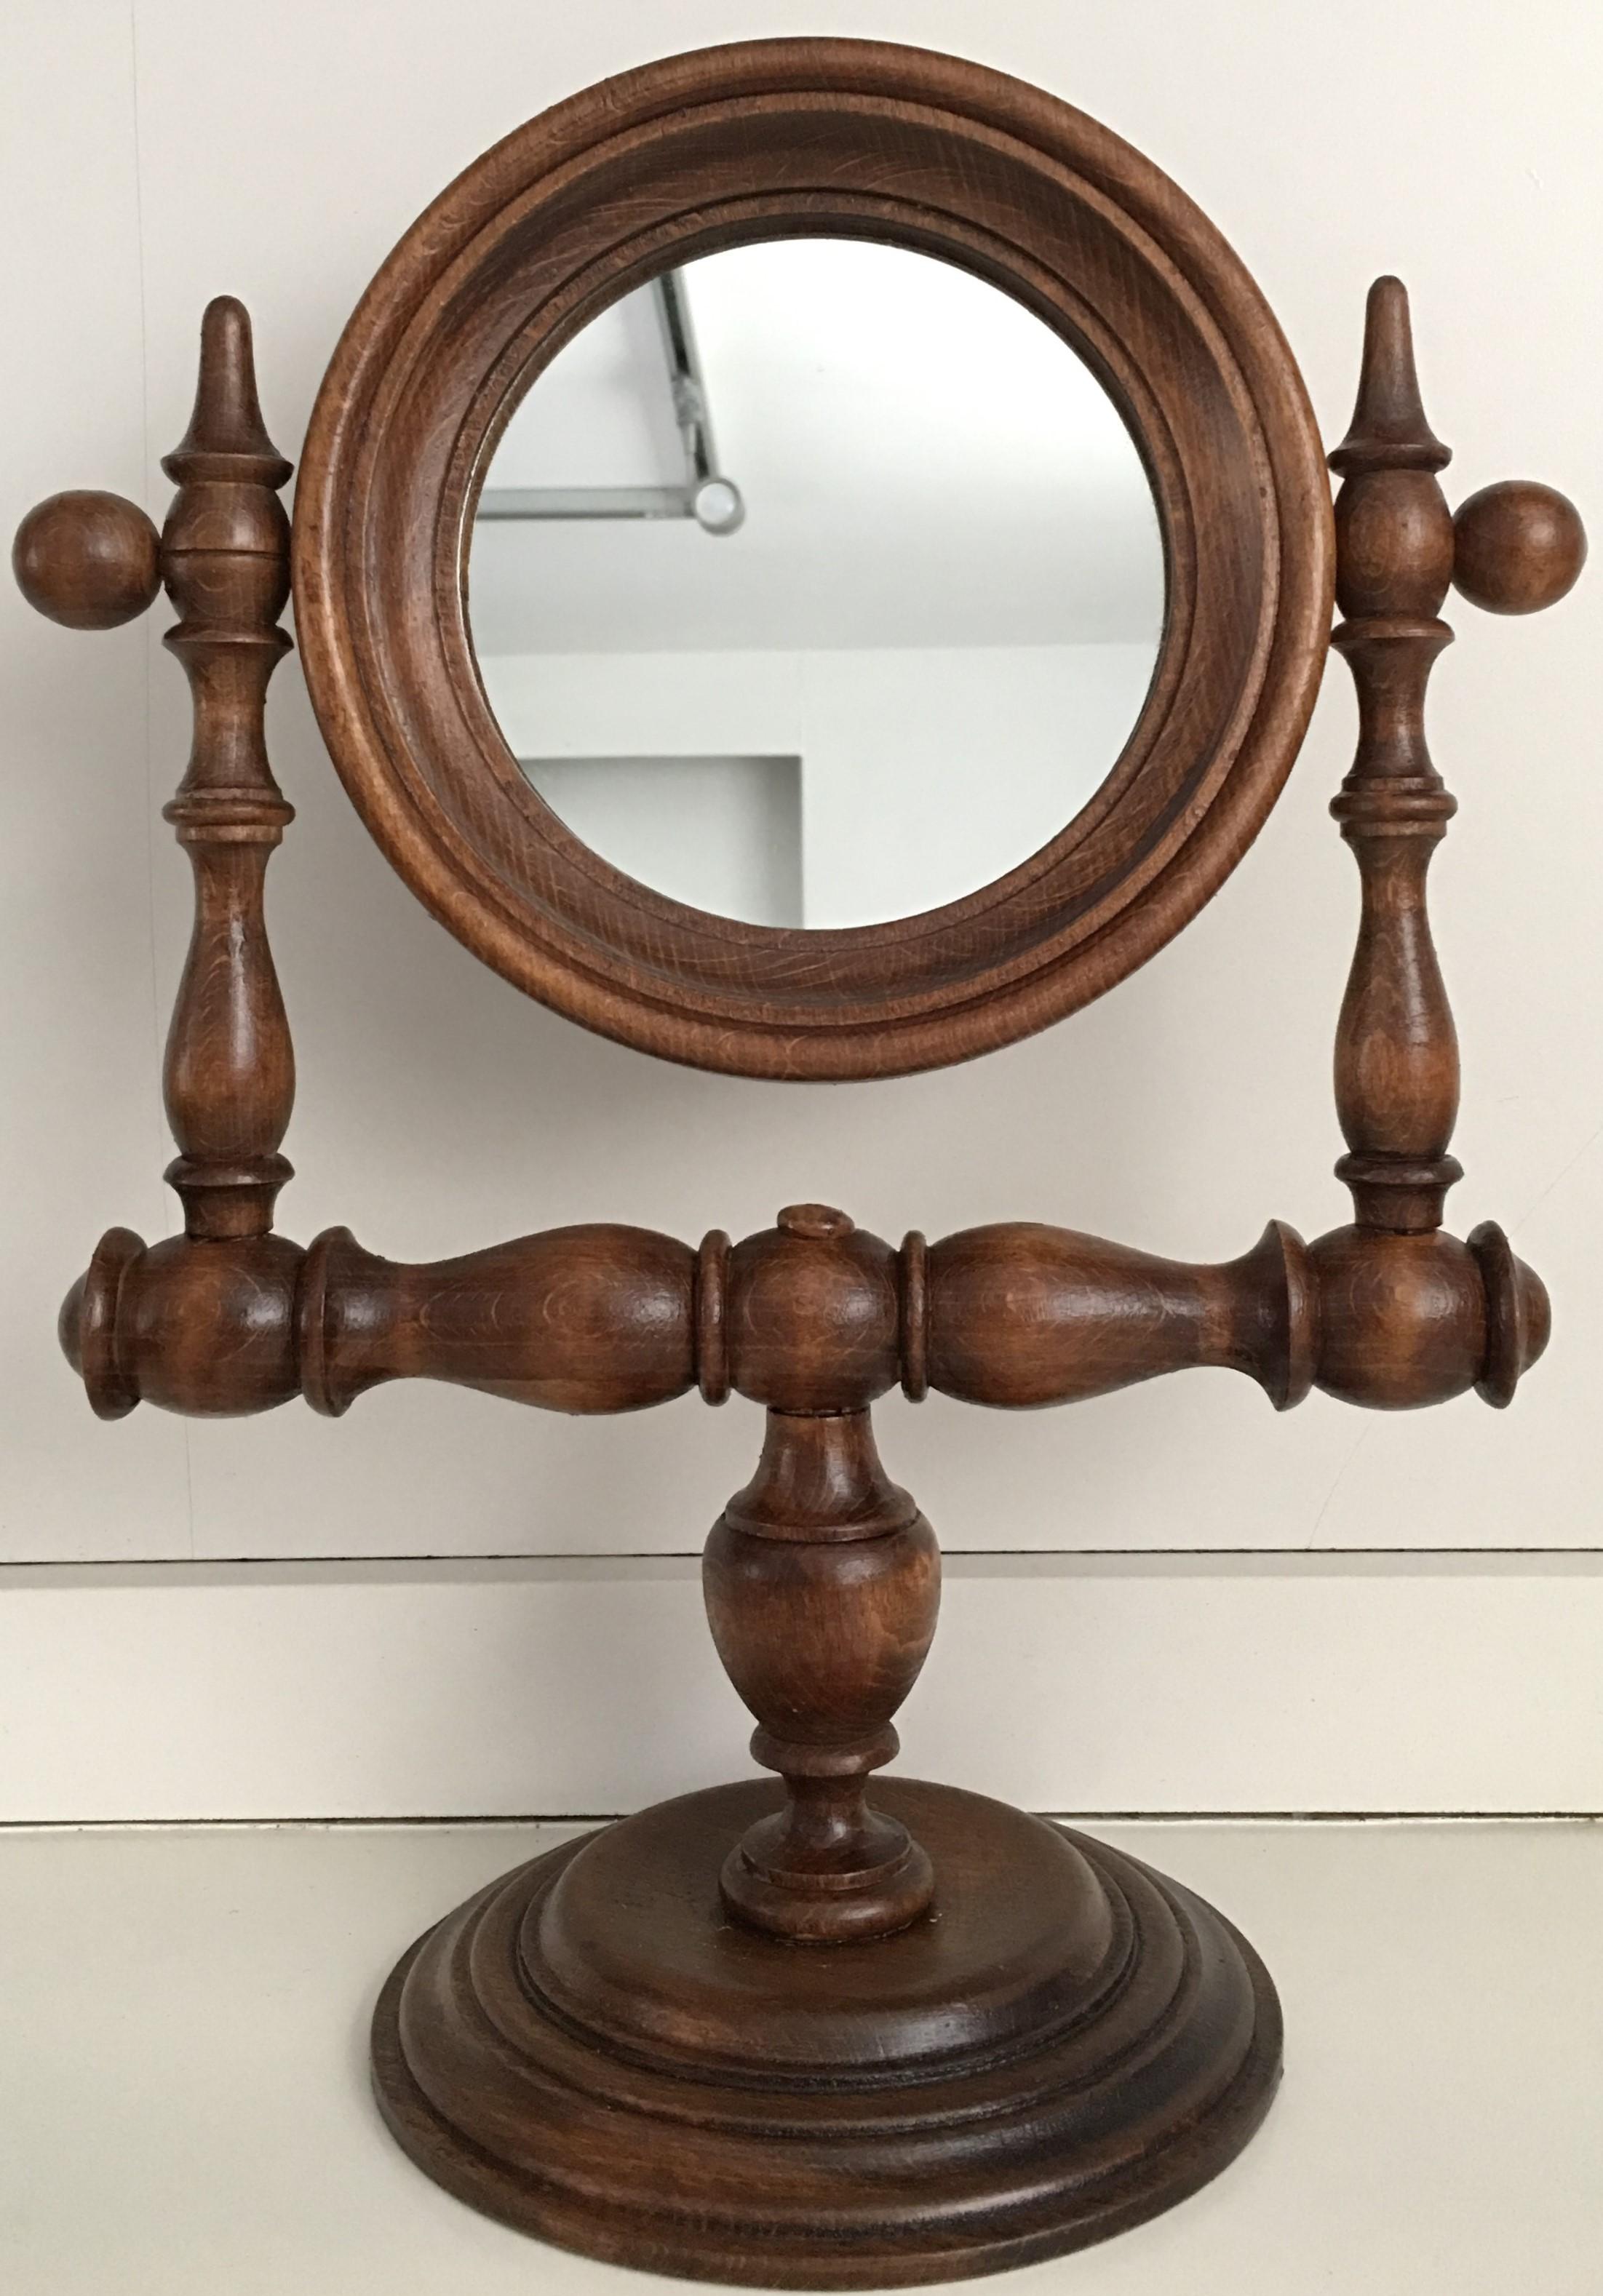 20th century Victorian walnut dressing table mirrors, France
A lovely Victorian walnut shaving stand, circa 1880. Having an adjustable beveled edge mirror which is nicely framed with the lipped edge standing above the circular stand with a reeded